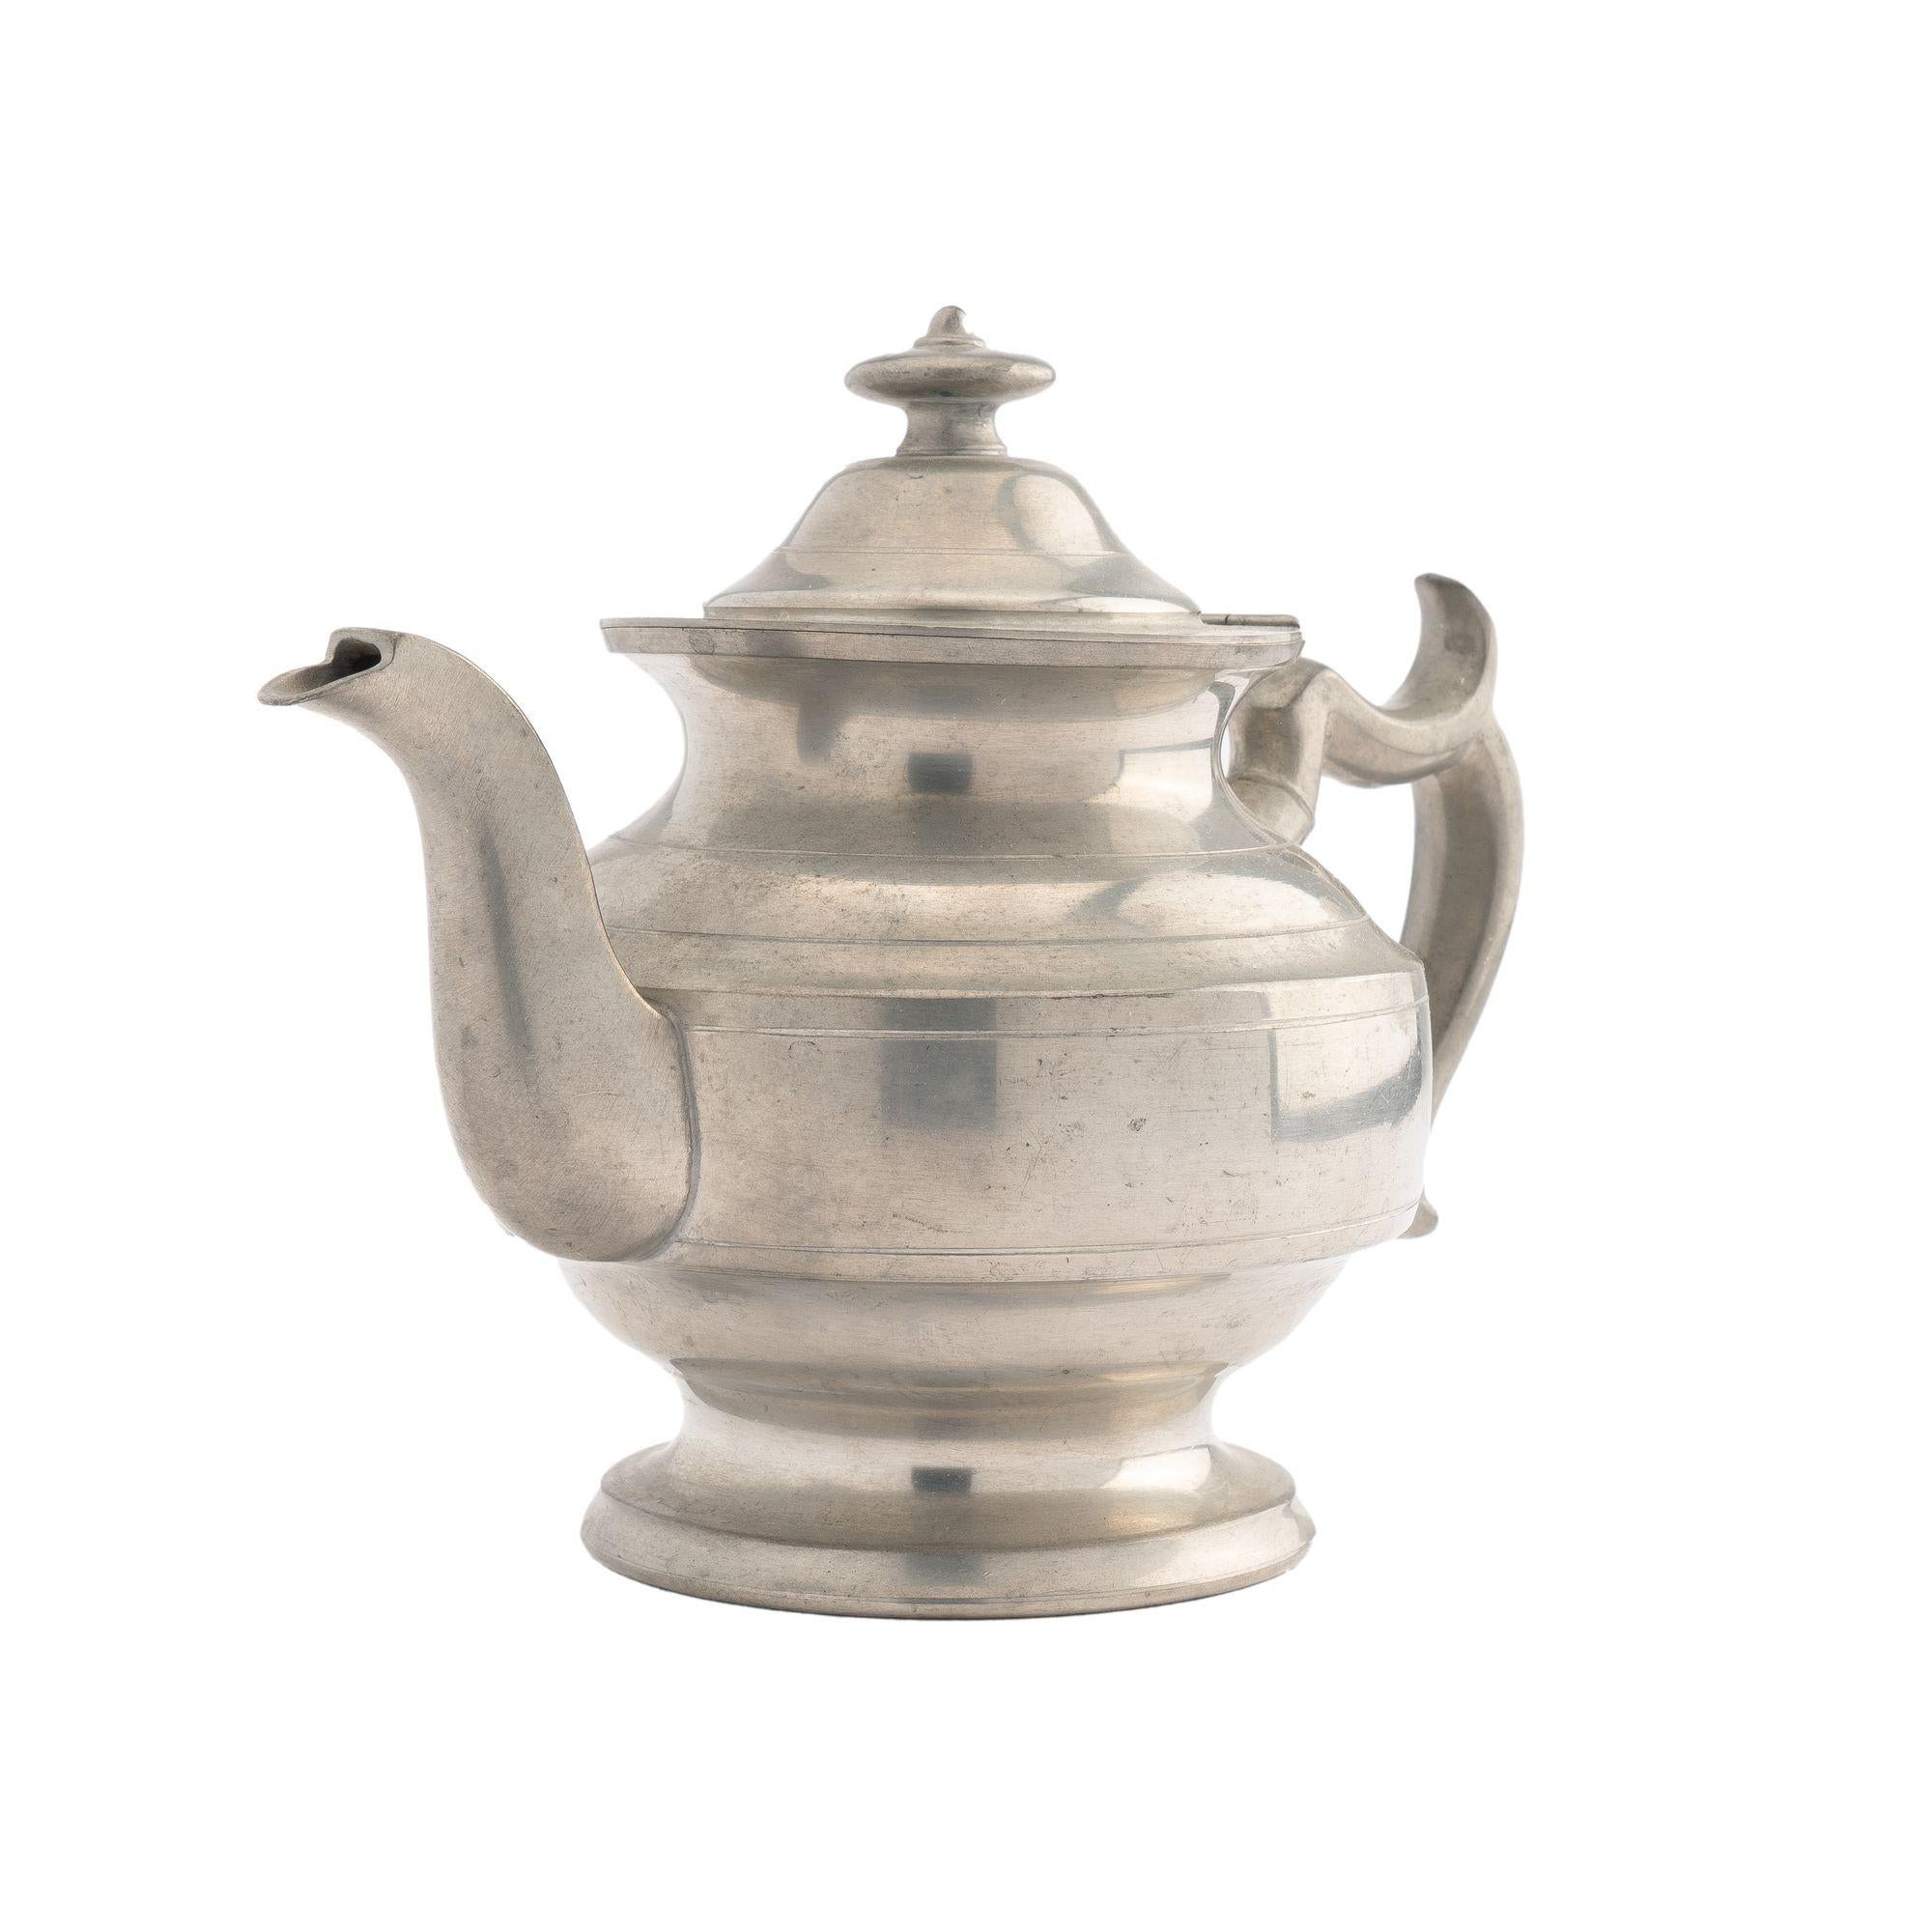 Pewter Holloware teapot from Woodbury Pewter. The teapot is an Academic Revival design after a Meridian, Connecticut model from 1820. Stamped on the underside with the maker's mark.
American, 1950 (design discontinued in 1952).